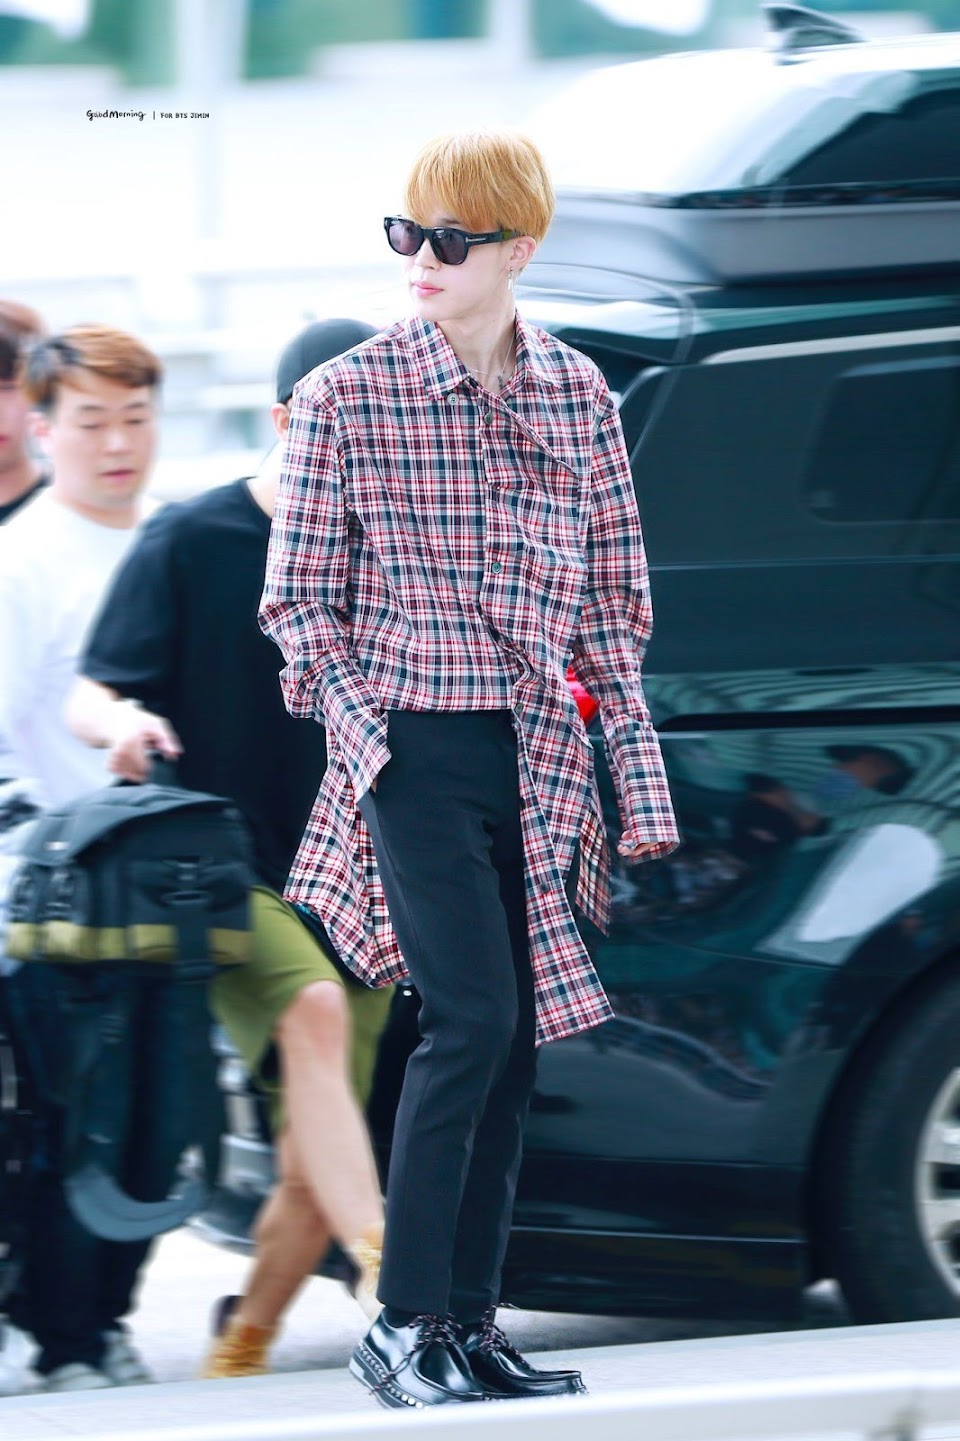 BTS Jimin's elegant airport fashion is highlighted by Japanese fashion  magazine and praised by experts